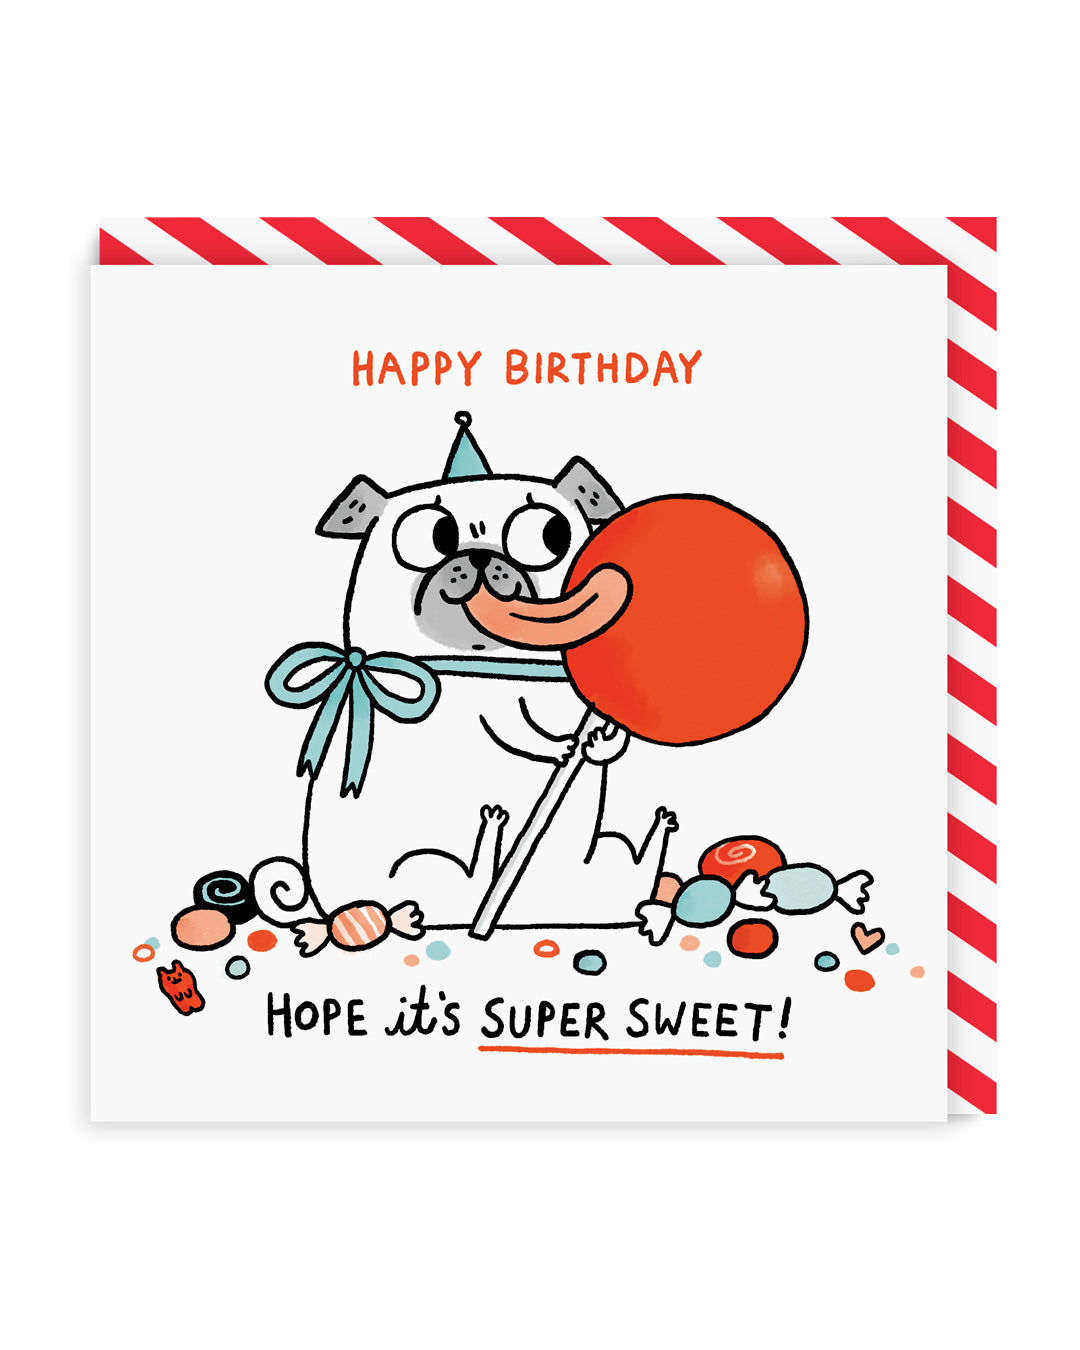 Funny Birthday Card Hope It’s Super Sweet Square Birthday Greeting Card